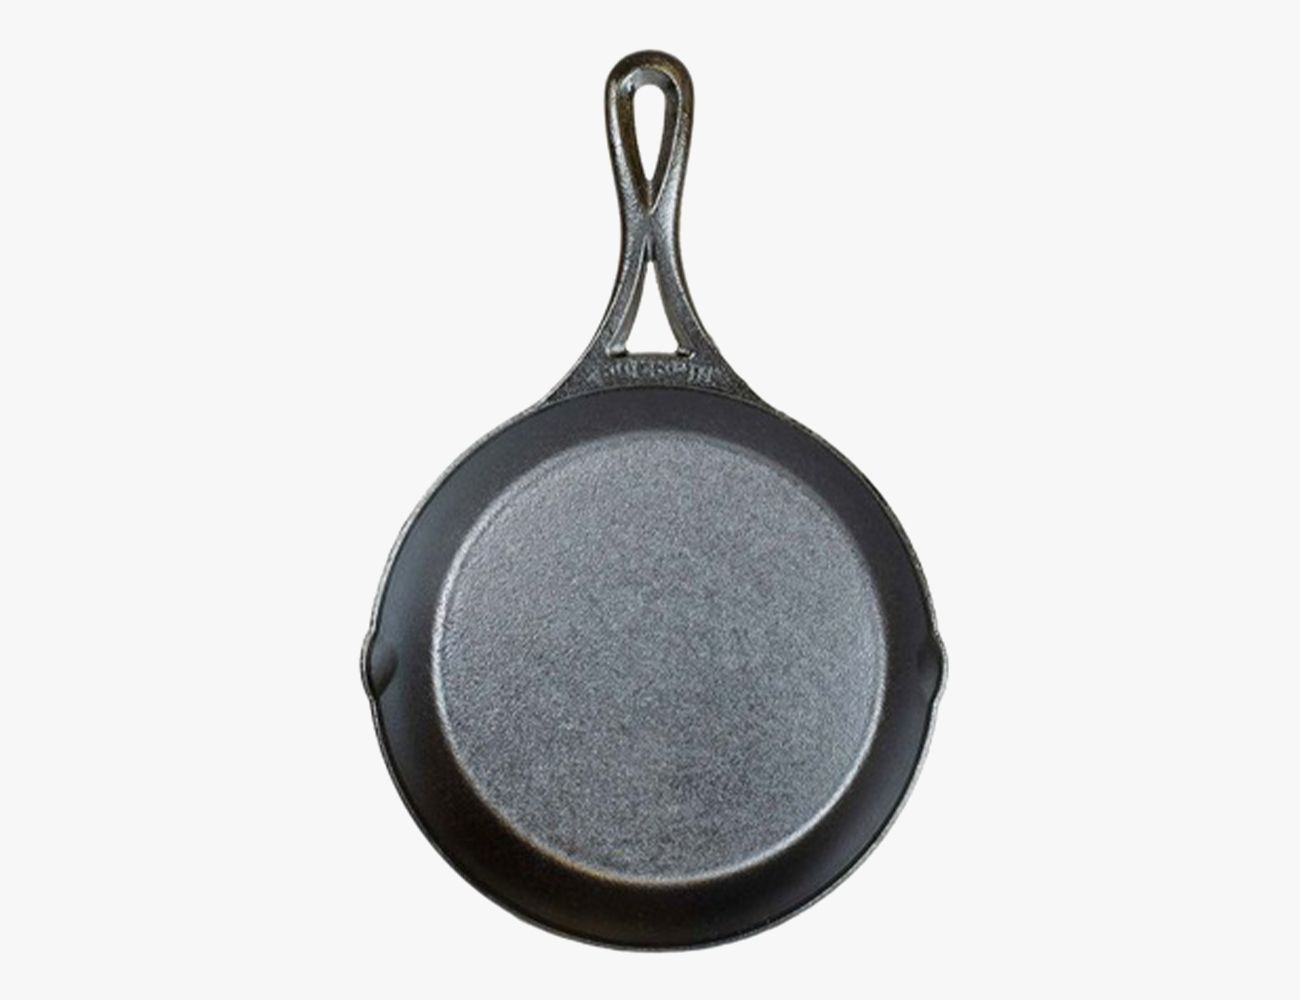 Lodge 9 Inch Cast Iron Pre-Seasoned Skillet – Signature Teardrop Handle -  Use in the Oven, on the Stove, on the Grill, or Over a Campfire, Black